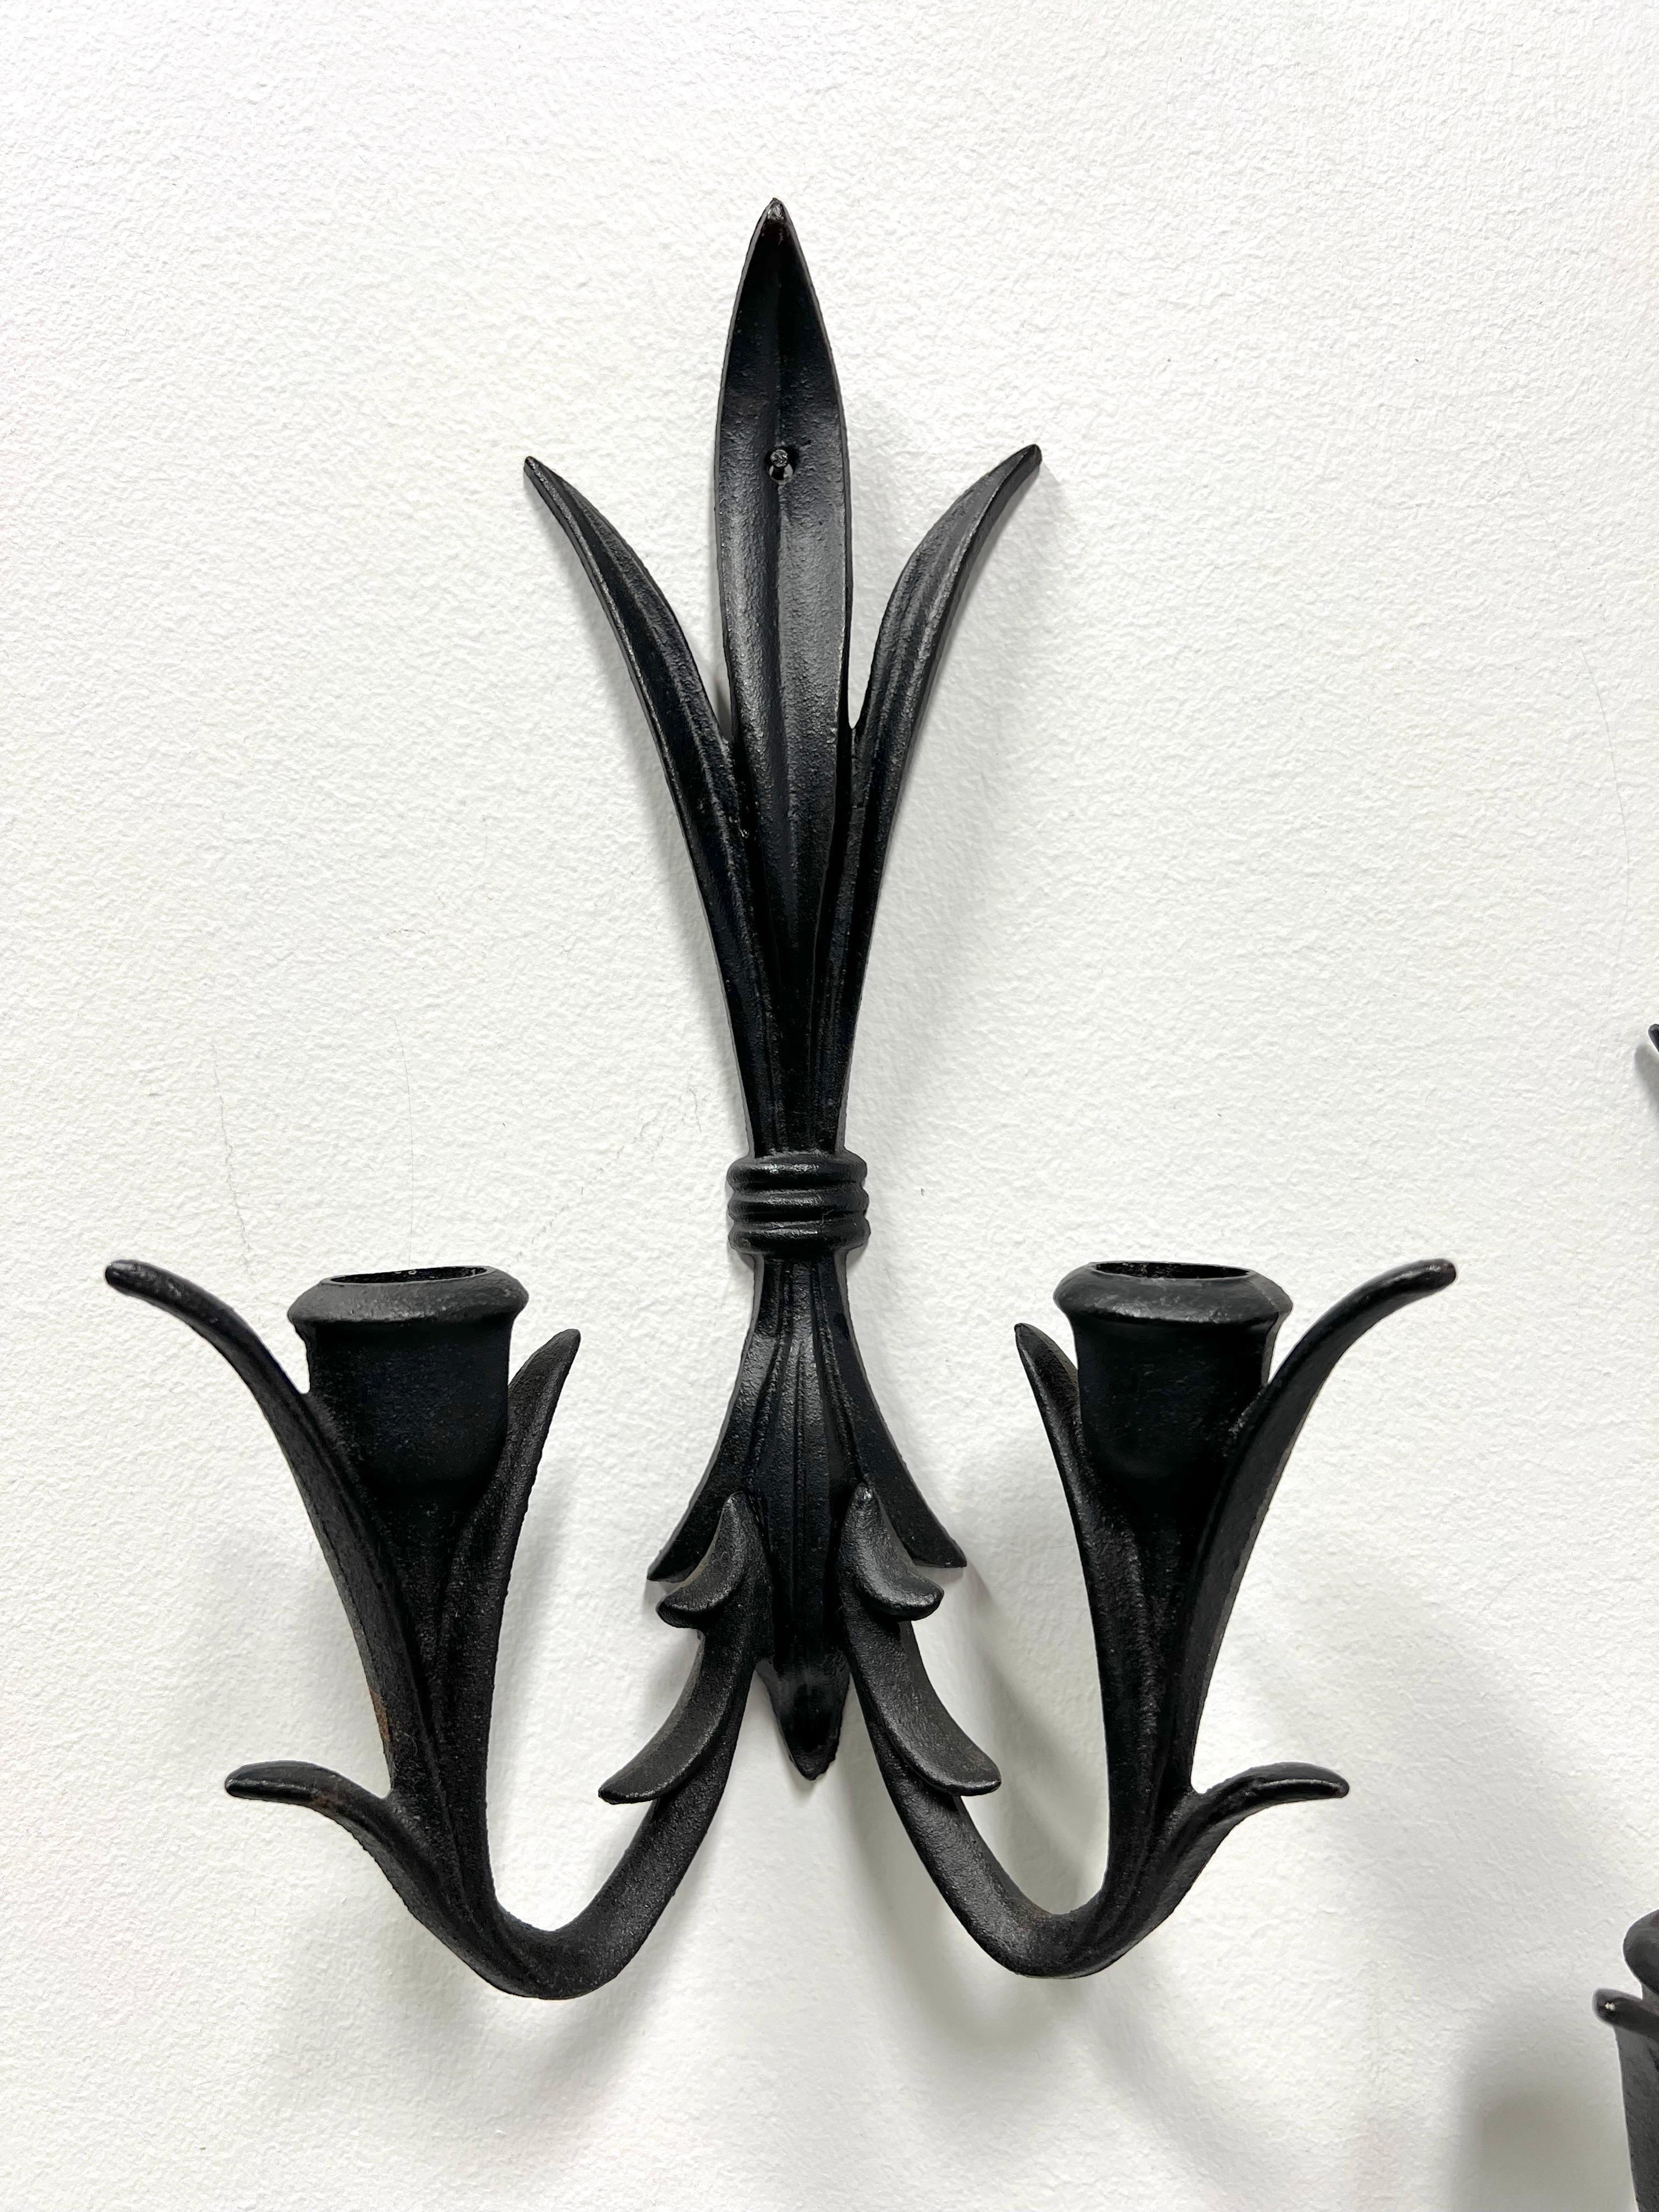 American WILTON Mid 20th Century Gothic Cast Iron Candle Sconces - Pair For Sale